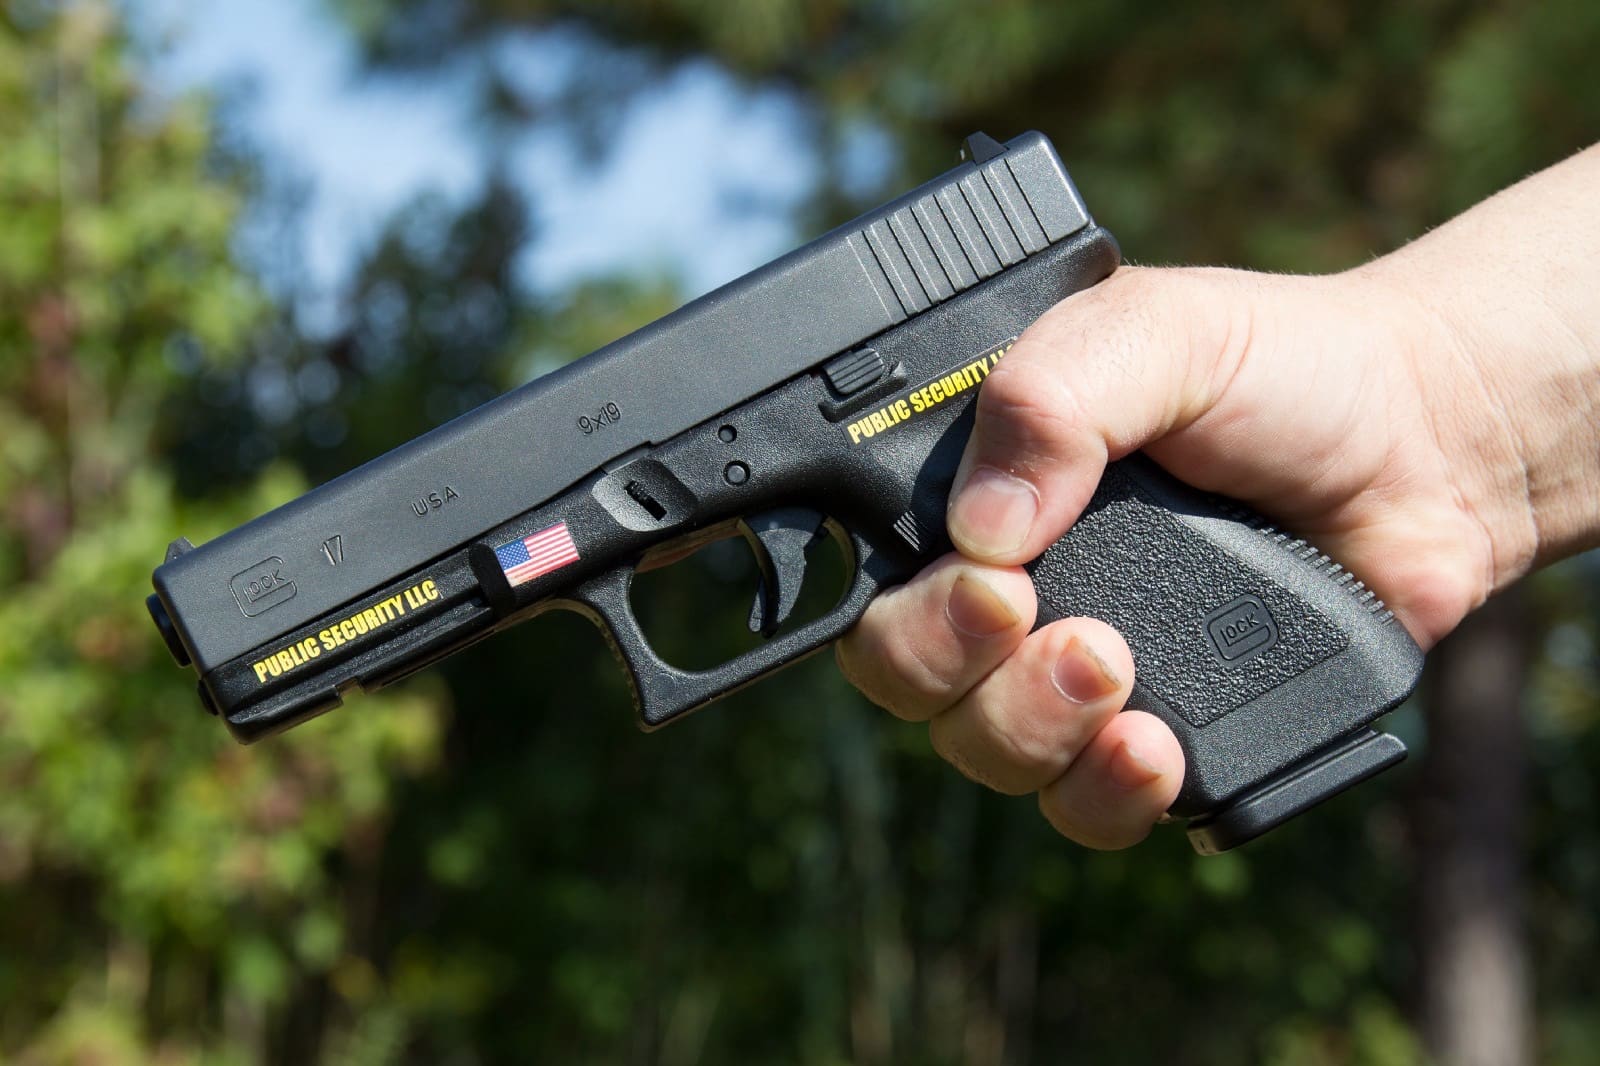 Glock pistol in a person's hand